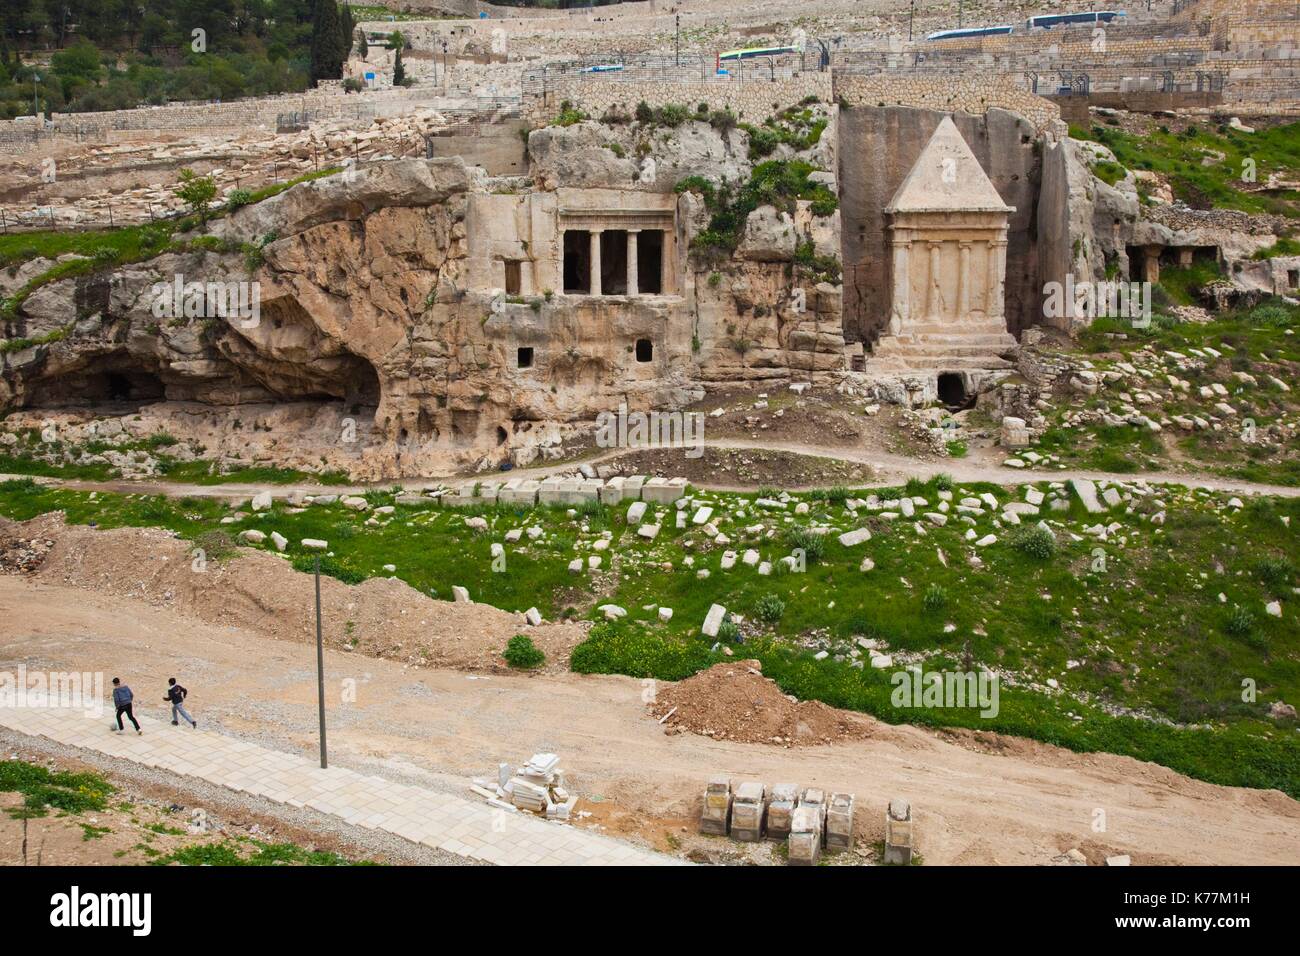 Israel, Jerusalem, Valley of Jehoshaphat, Grotto of Saint James and Absaloms Pillar, elevated view Stock Photo